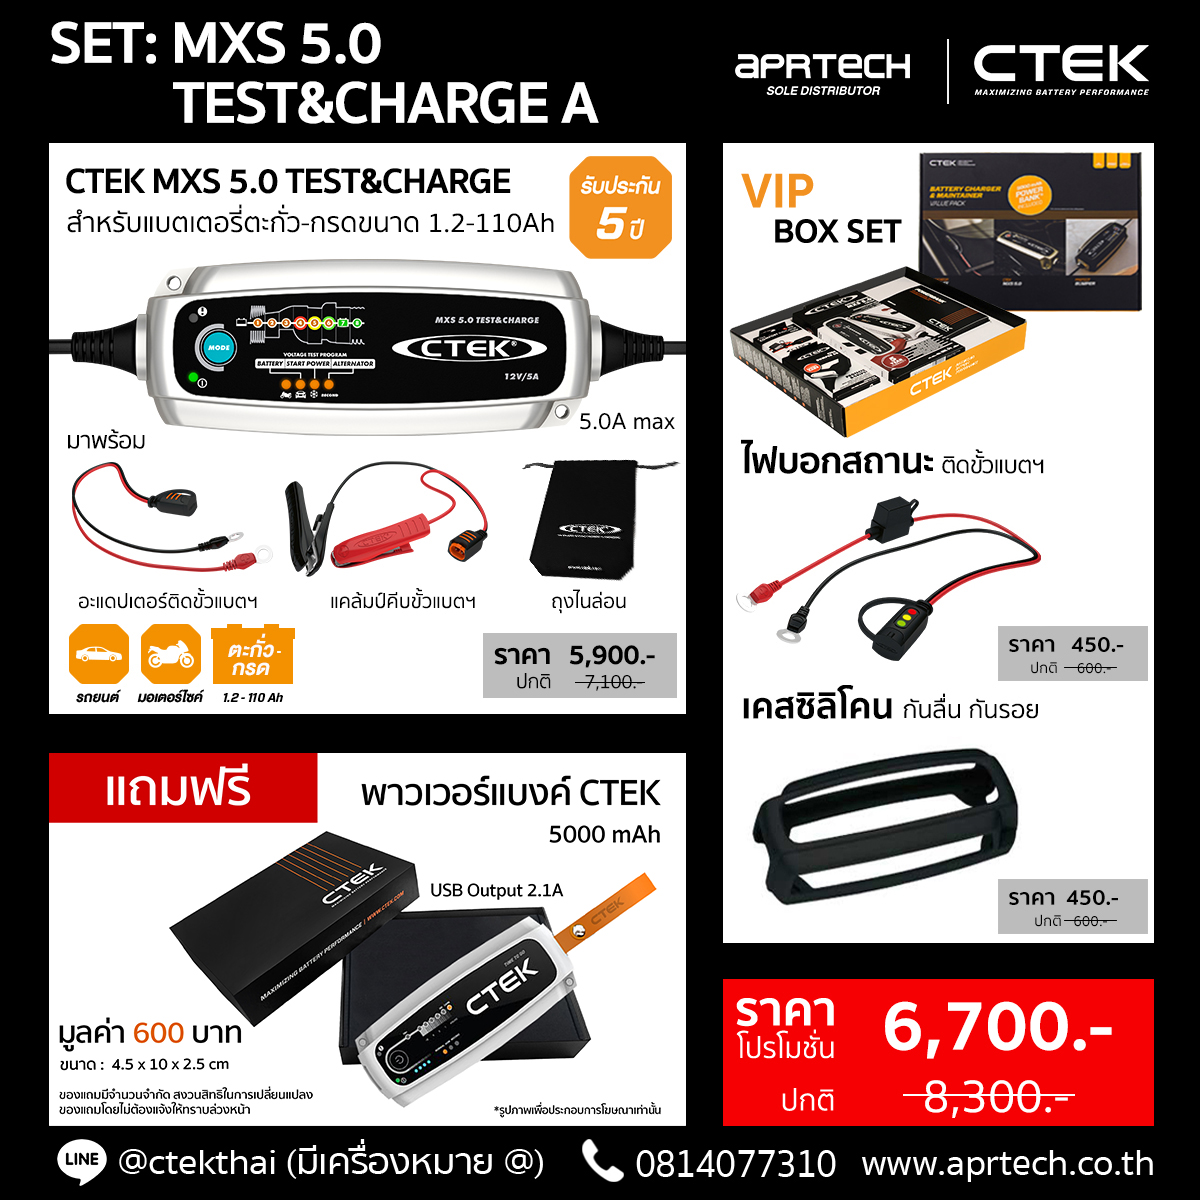 SET MXS 5.0 TEST&CHARGE A (MXS 5.0  TEST&CHARGE + Indicator + Bumper)